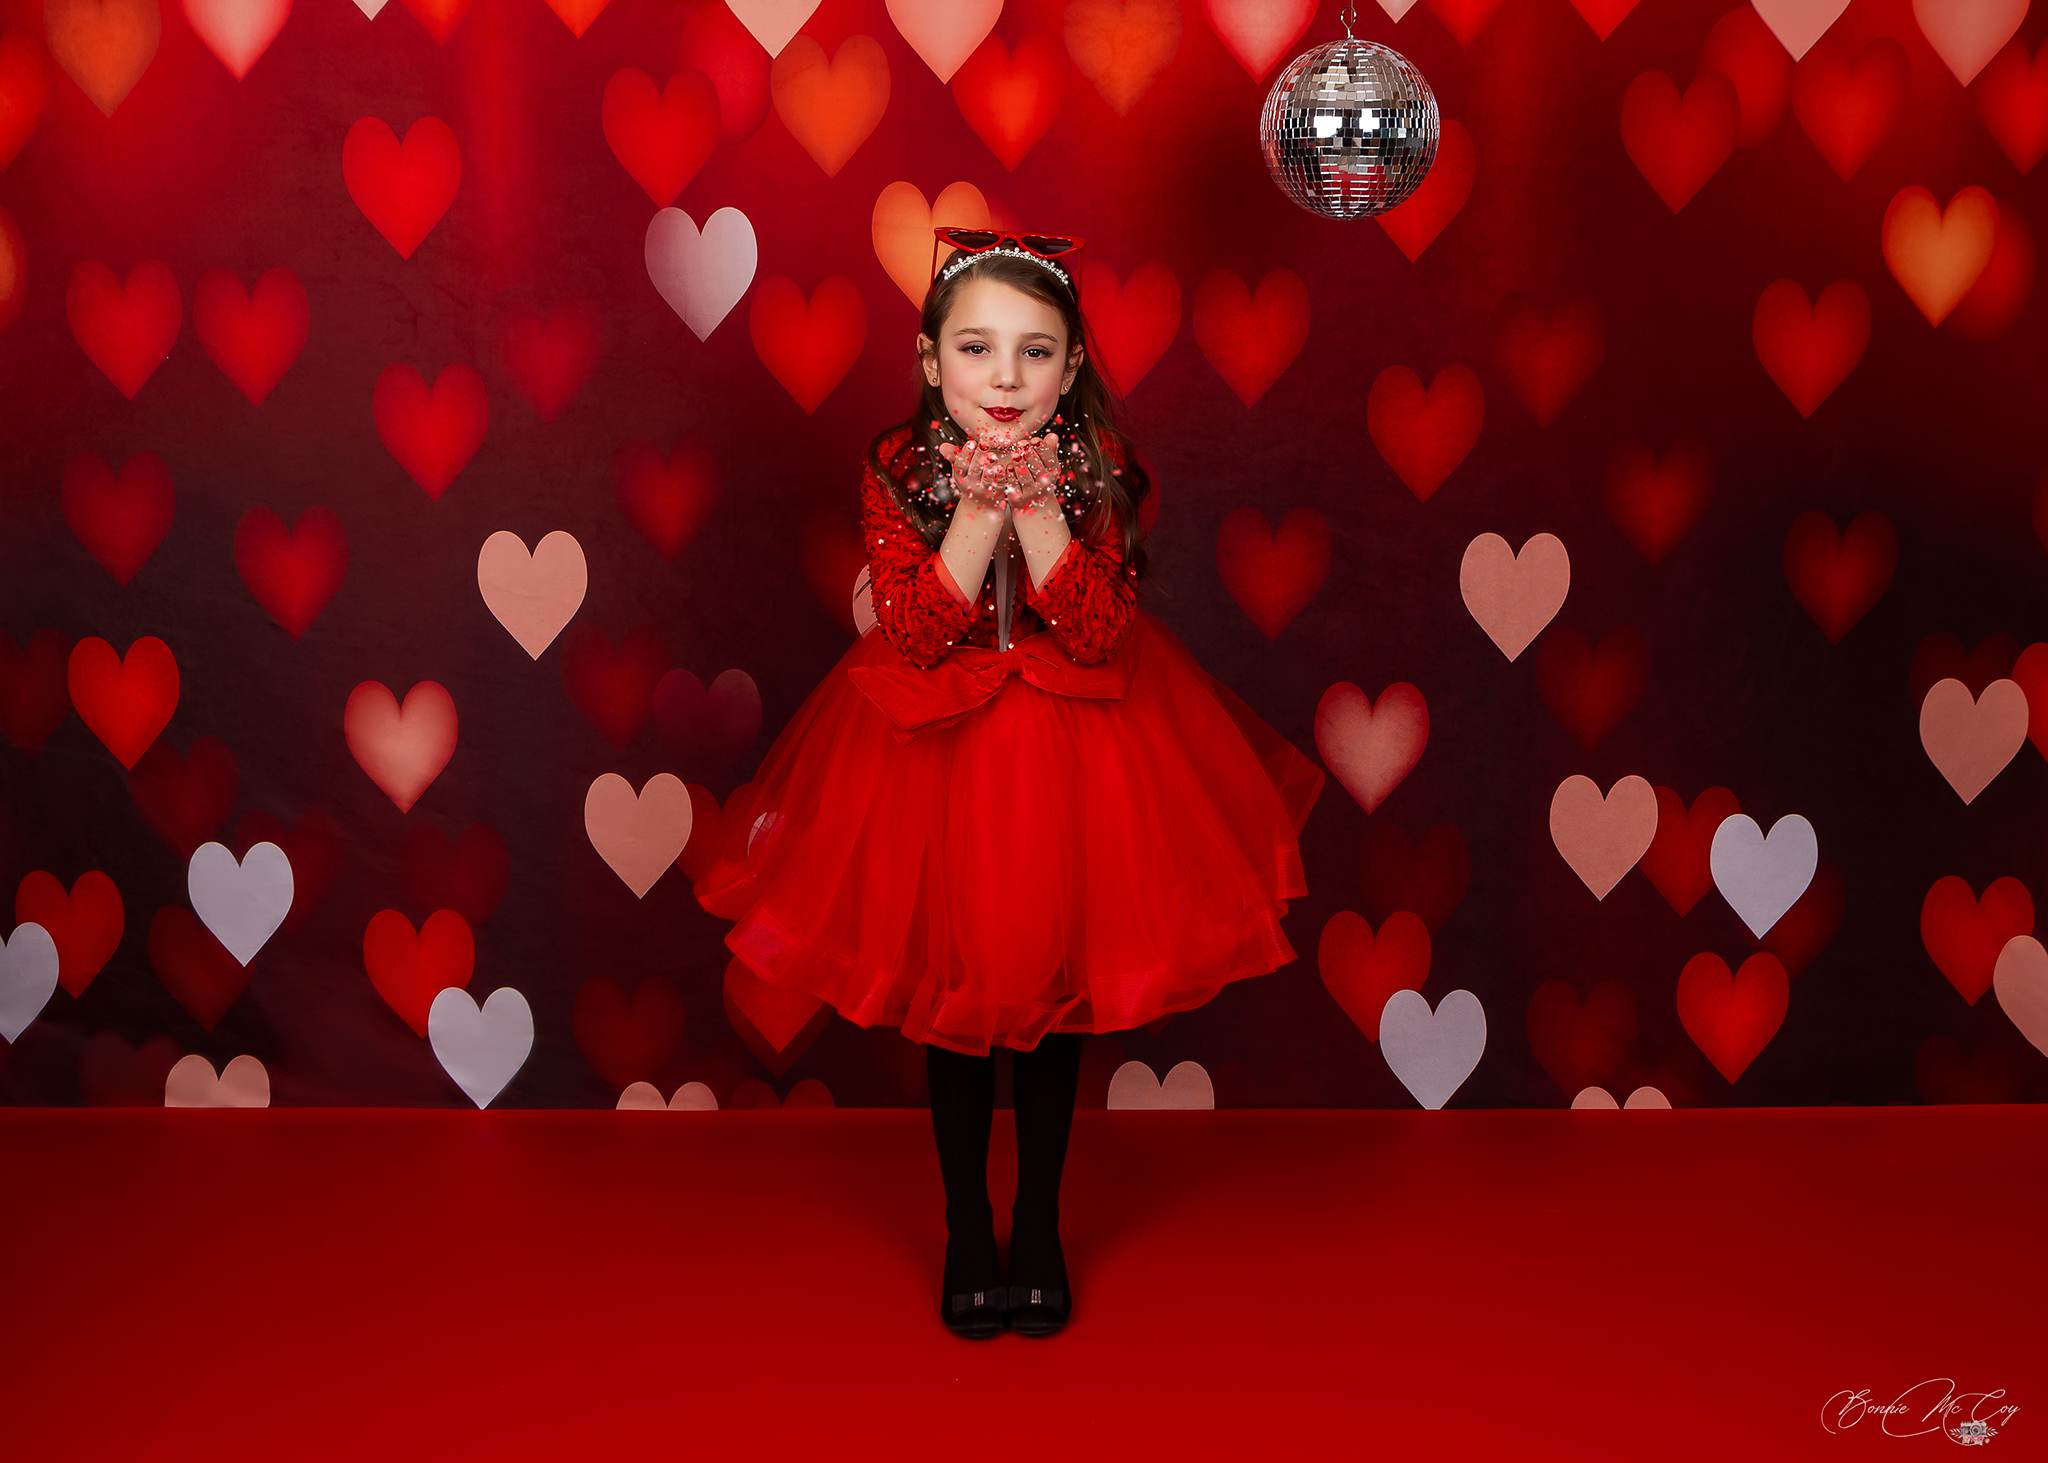 Kate Bokeh Valentine's Day Backdrop Red Defocus Designed by Kate Image